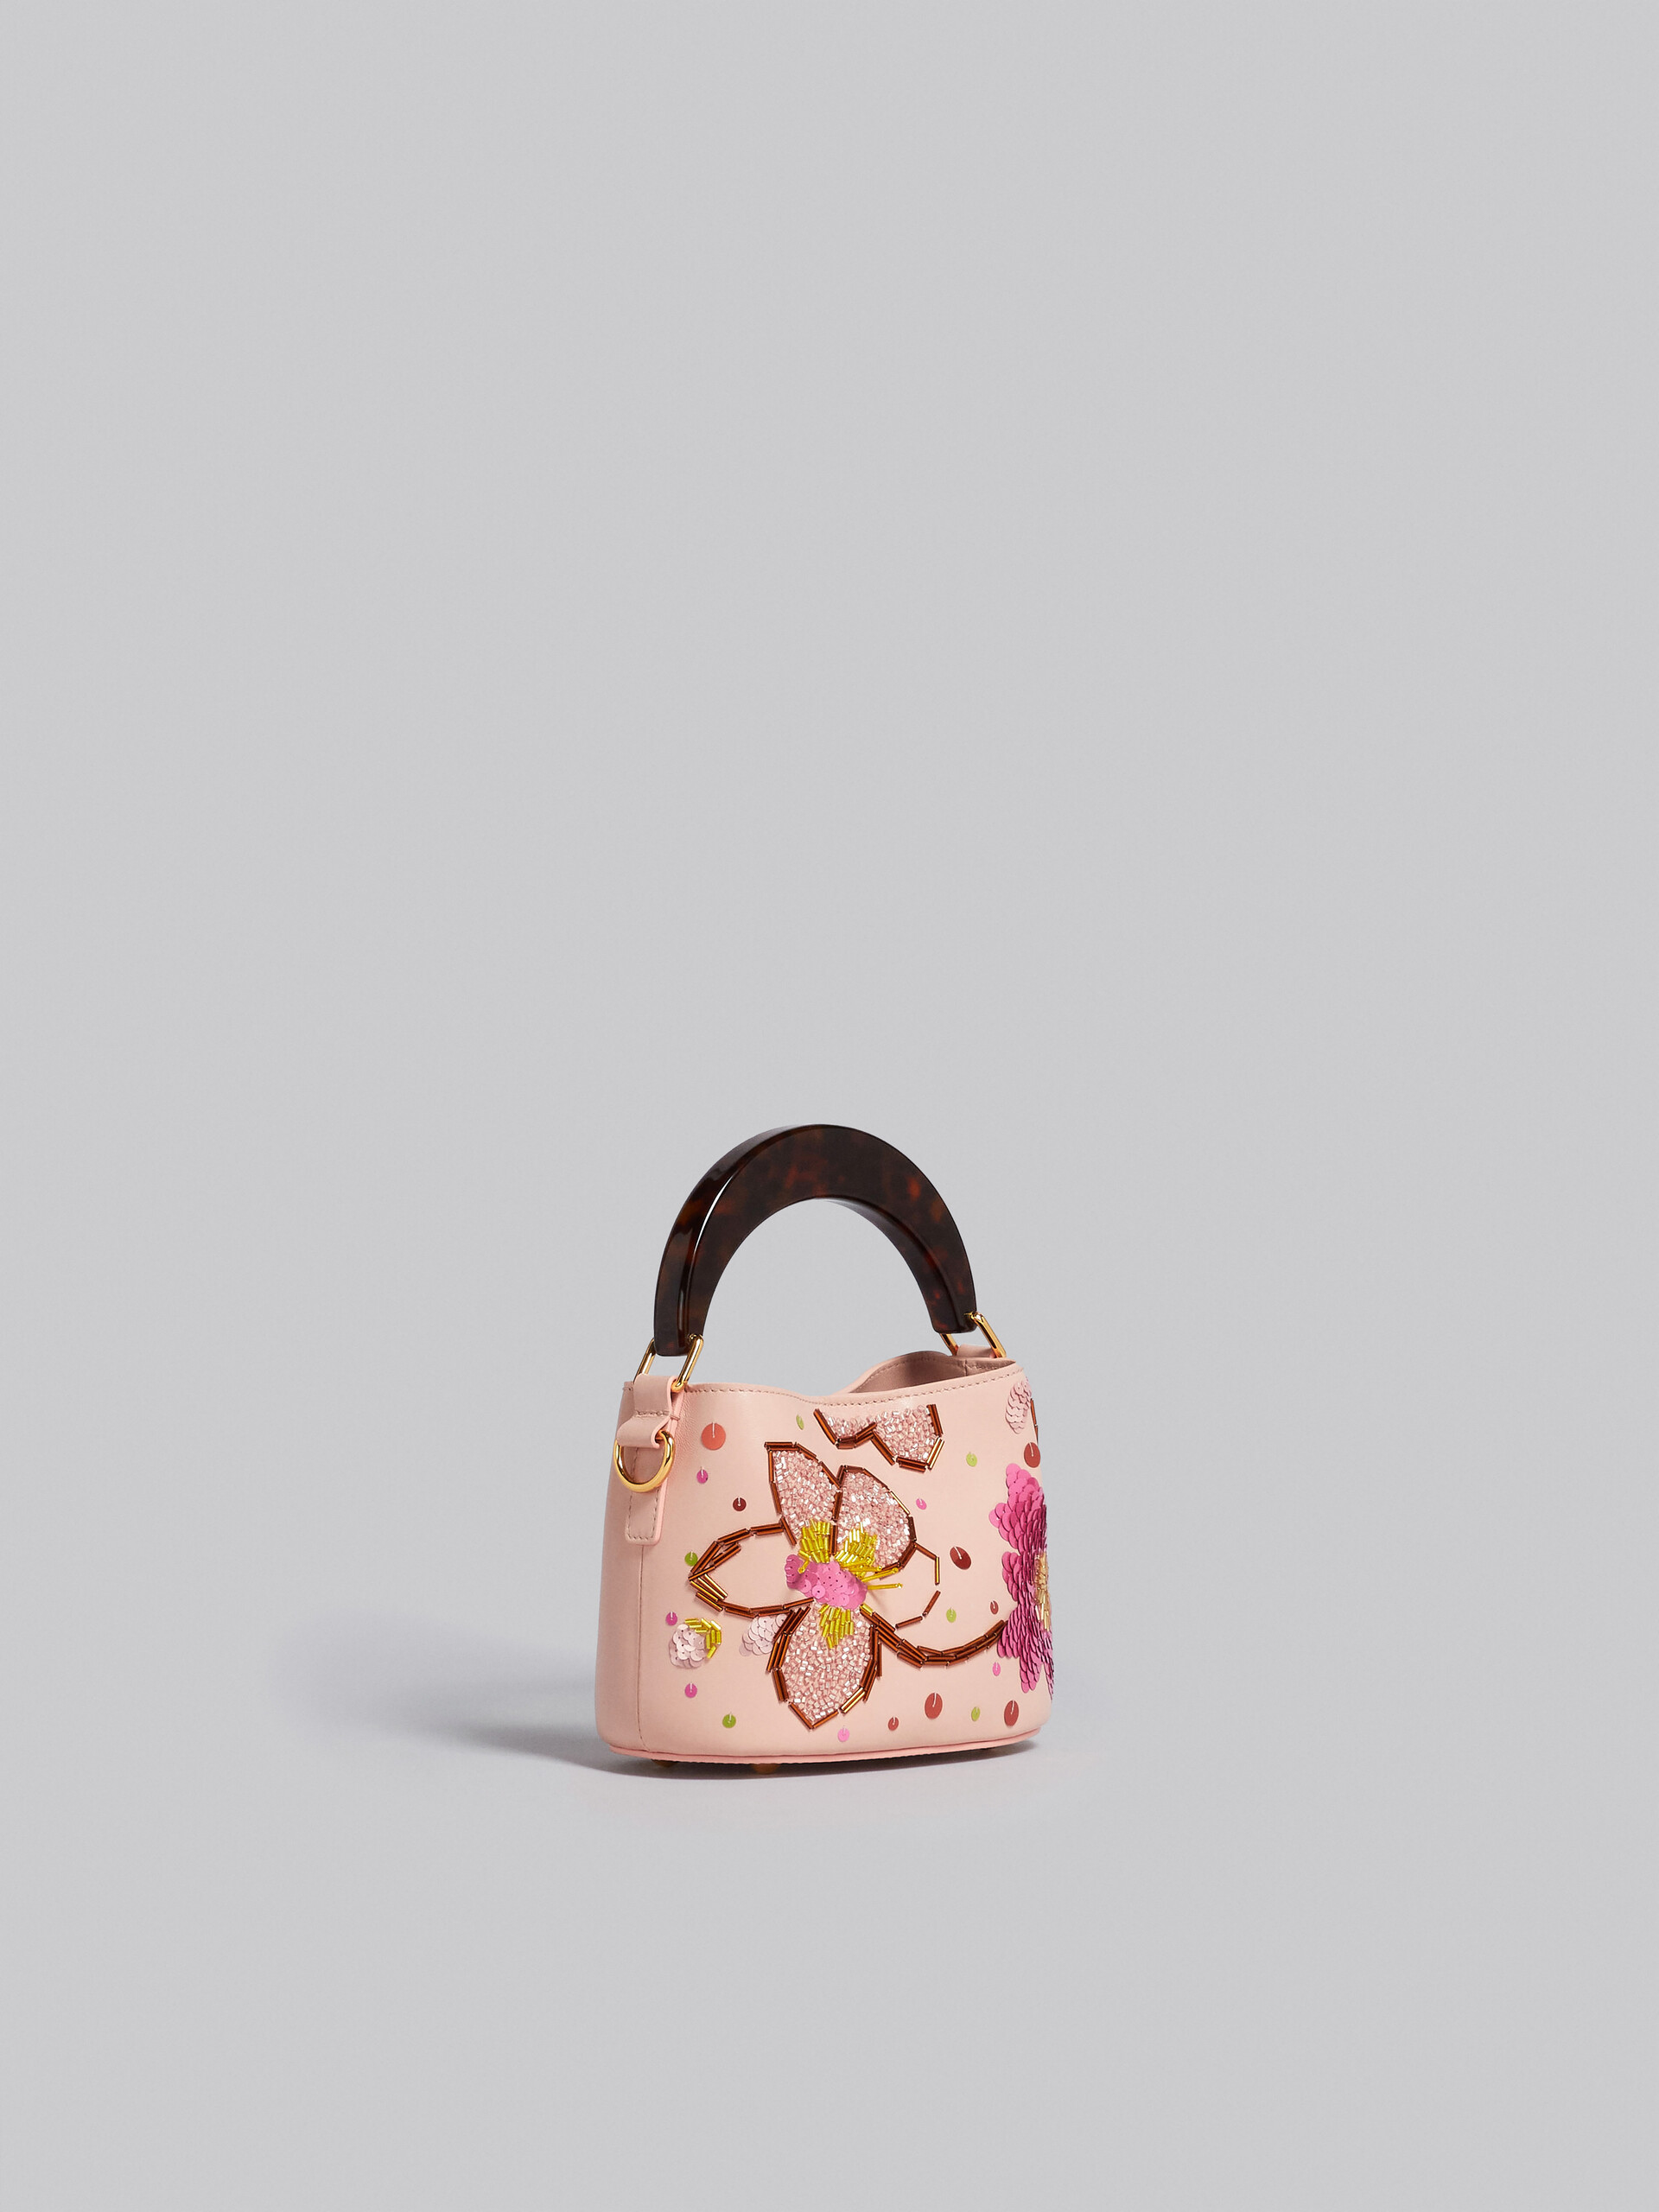 Venice Mini Bucket in embroidered pink leather - Shoulder Bag - Image 5